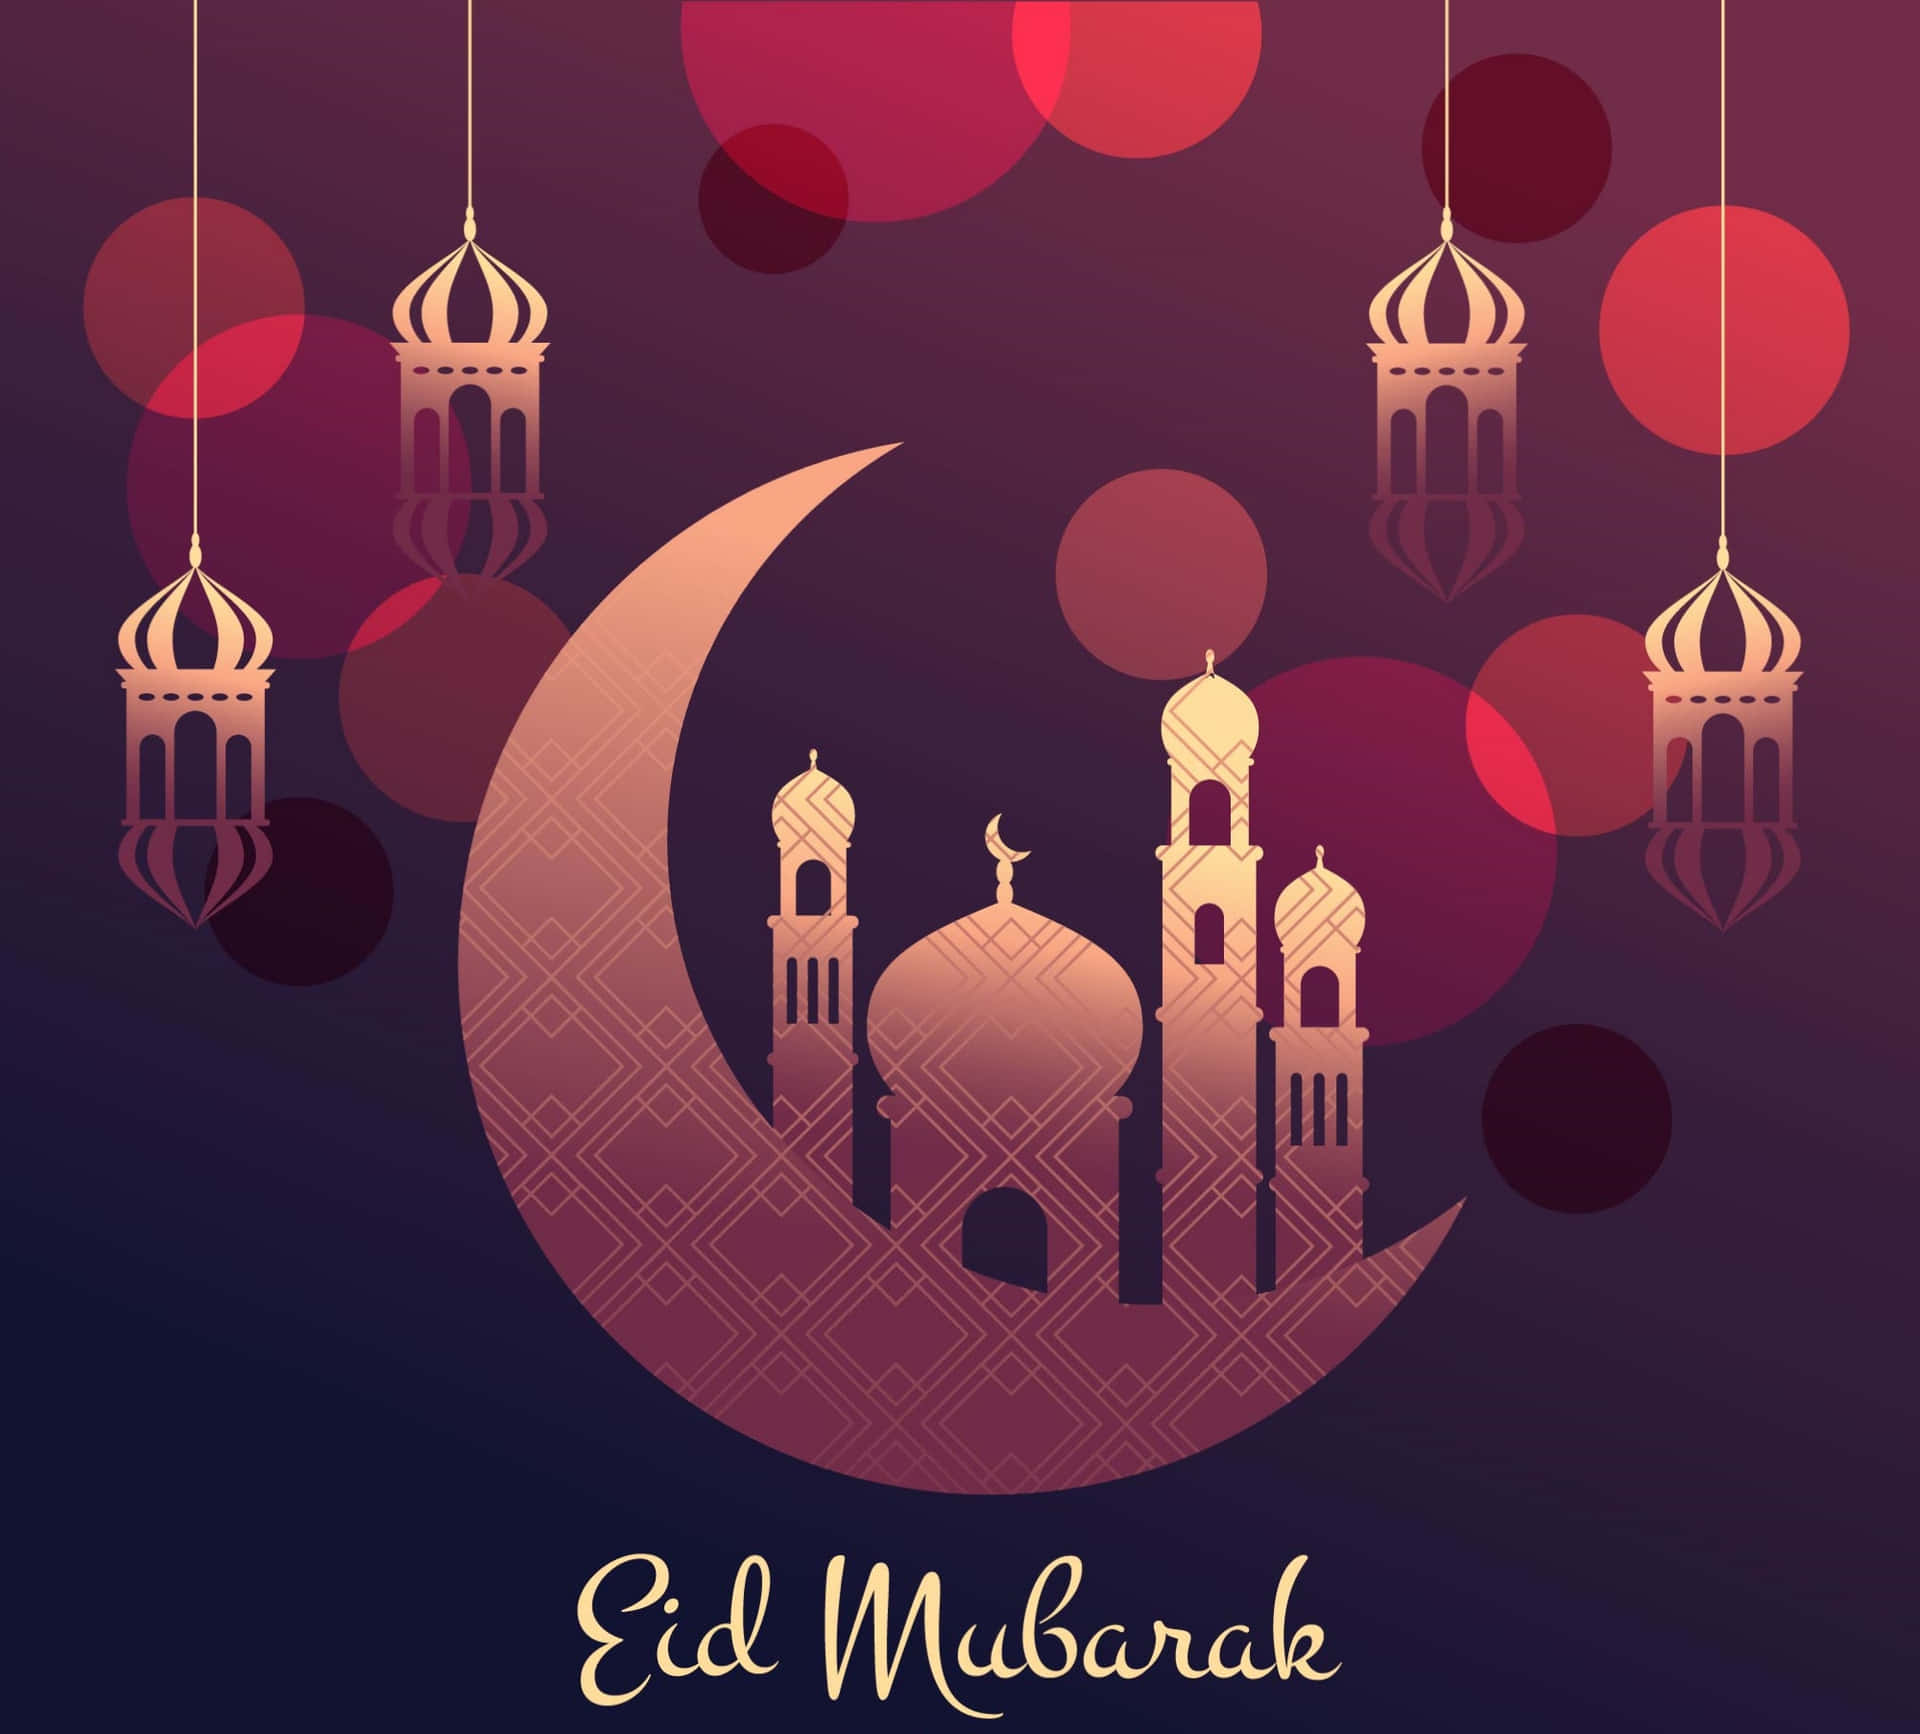 Celebrate the joy of Eid with family and friends